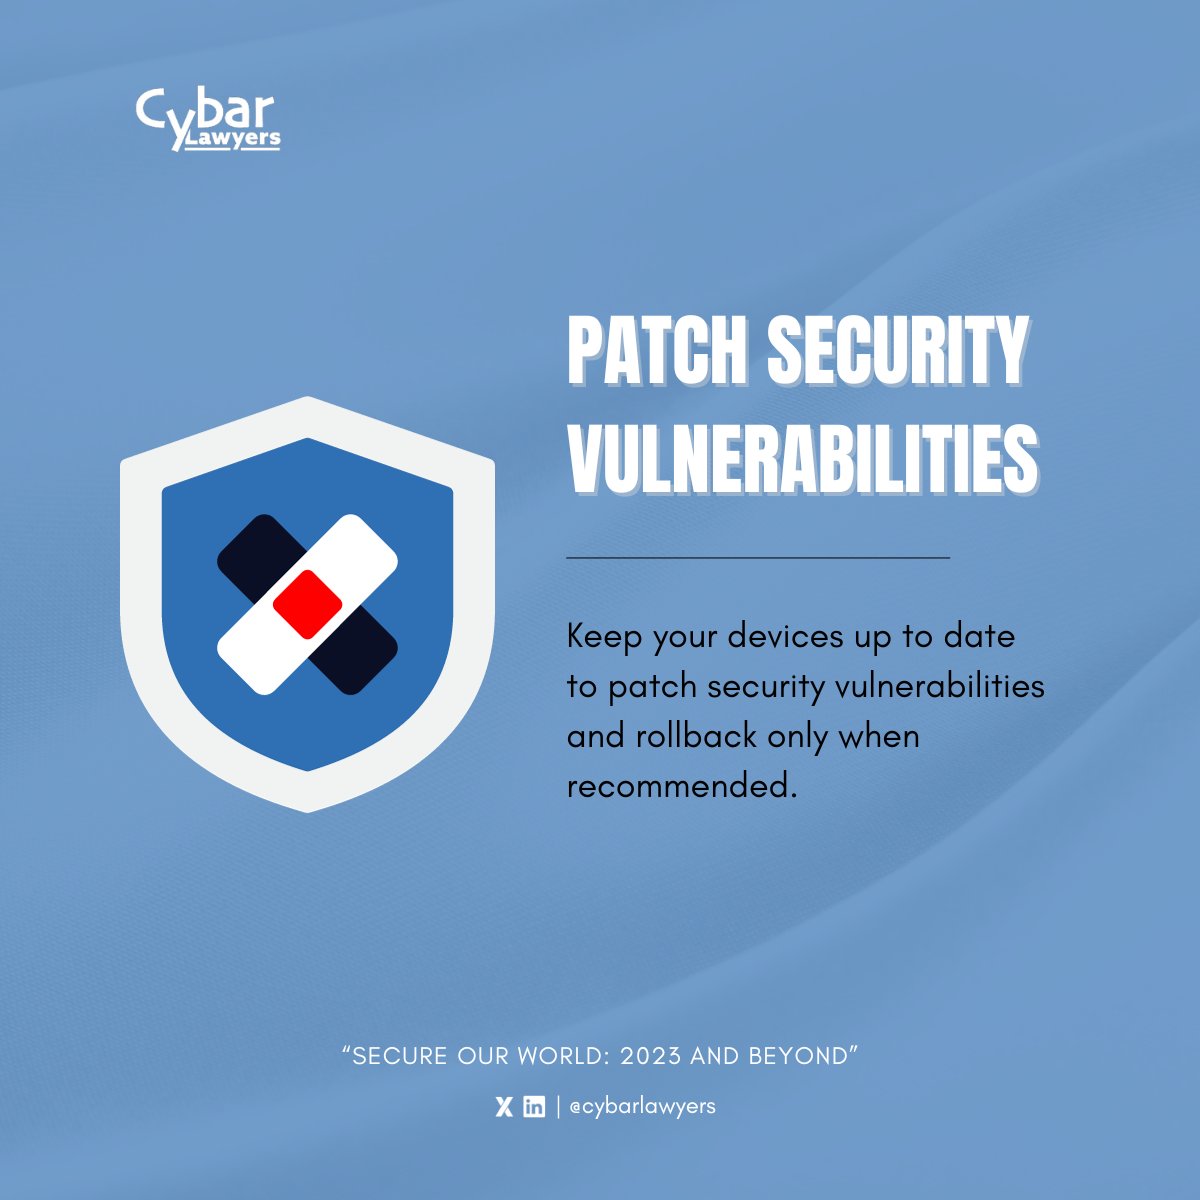 Regularly patching vulnerabilities is crucial for a robust defense. Rollbacks should be approached cautiously, ensuring they align with recommended practices to maintain a secure environment. Safety and security go hand in hand🤝🤝🤝
#CyberAwarenessMonth #DataProtection